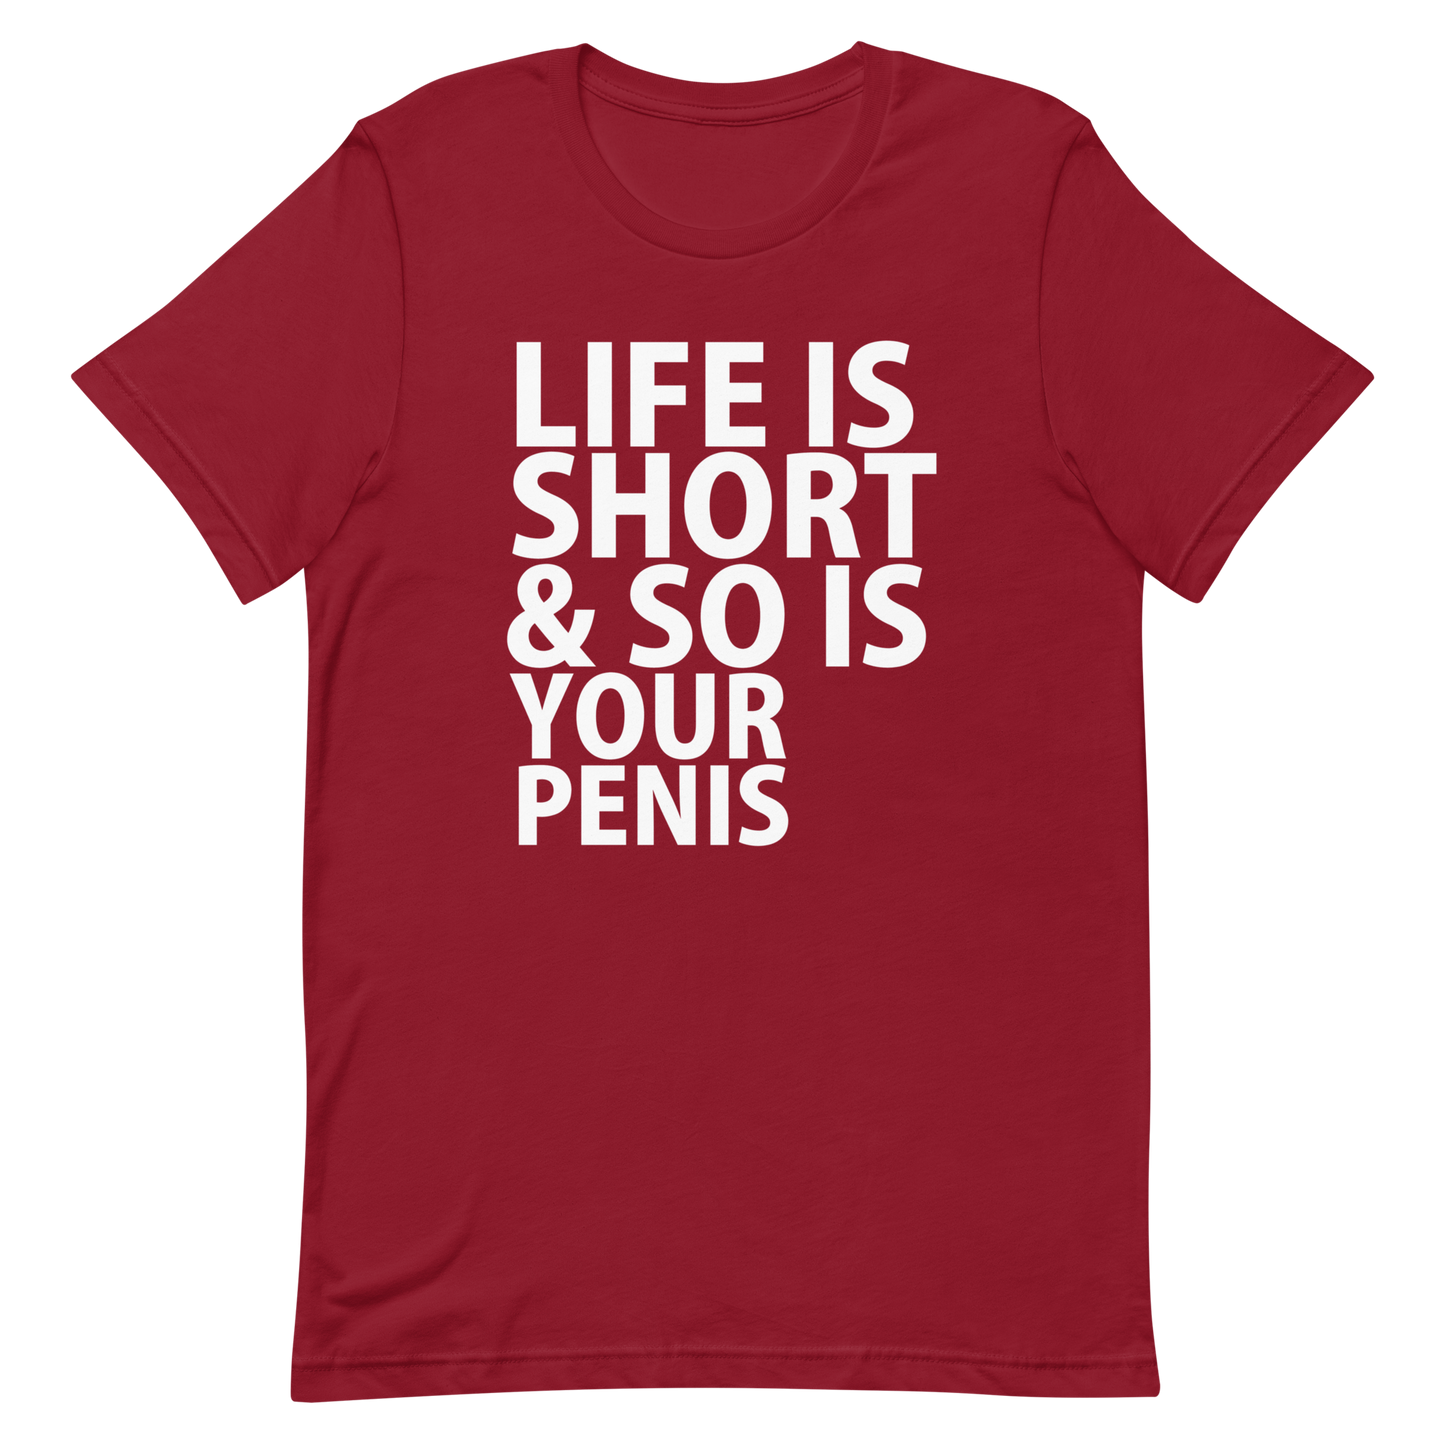 Life Is Short & So Is Your Penis T-Shirt - Cardinal